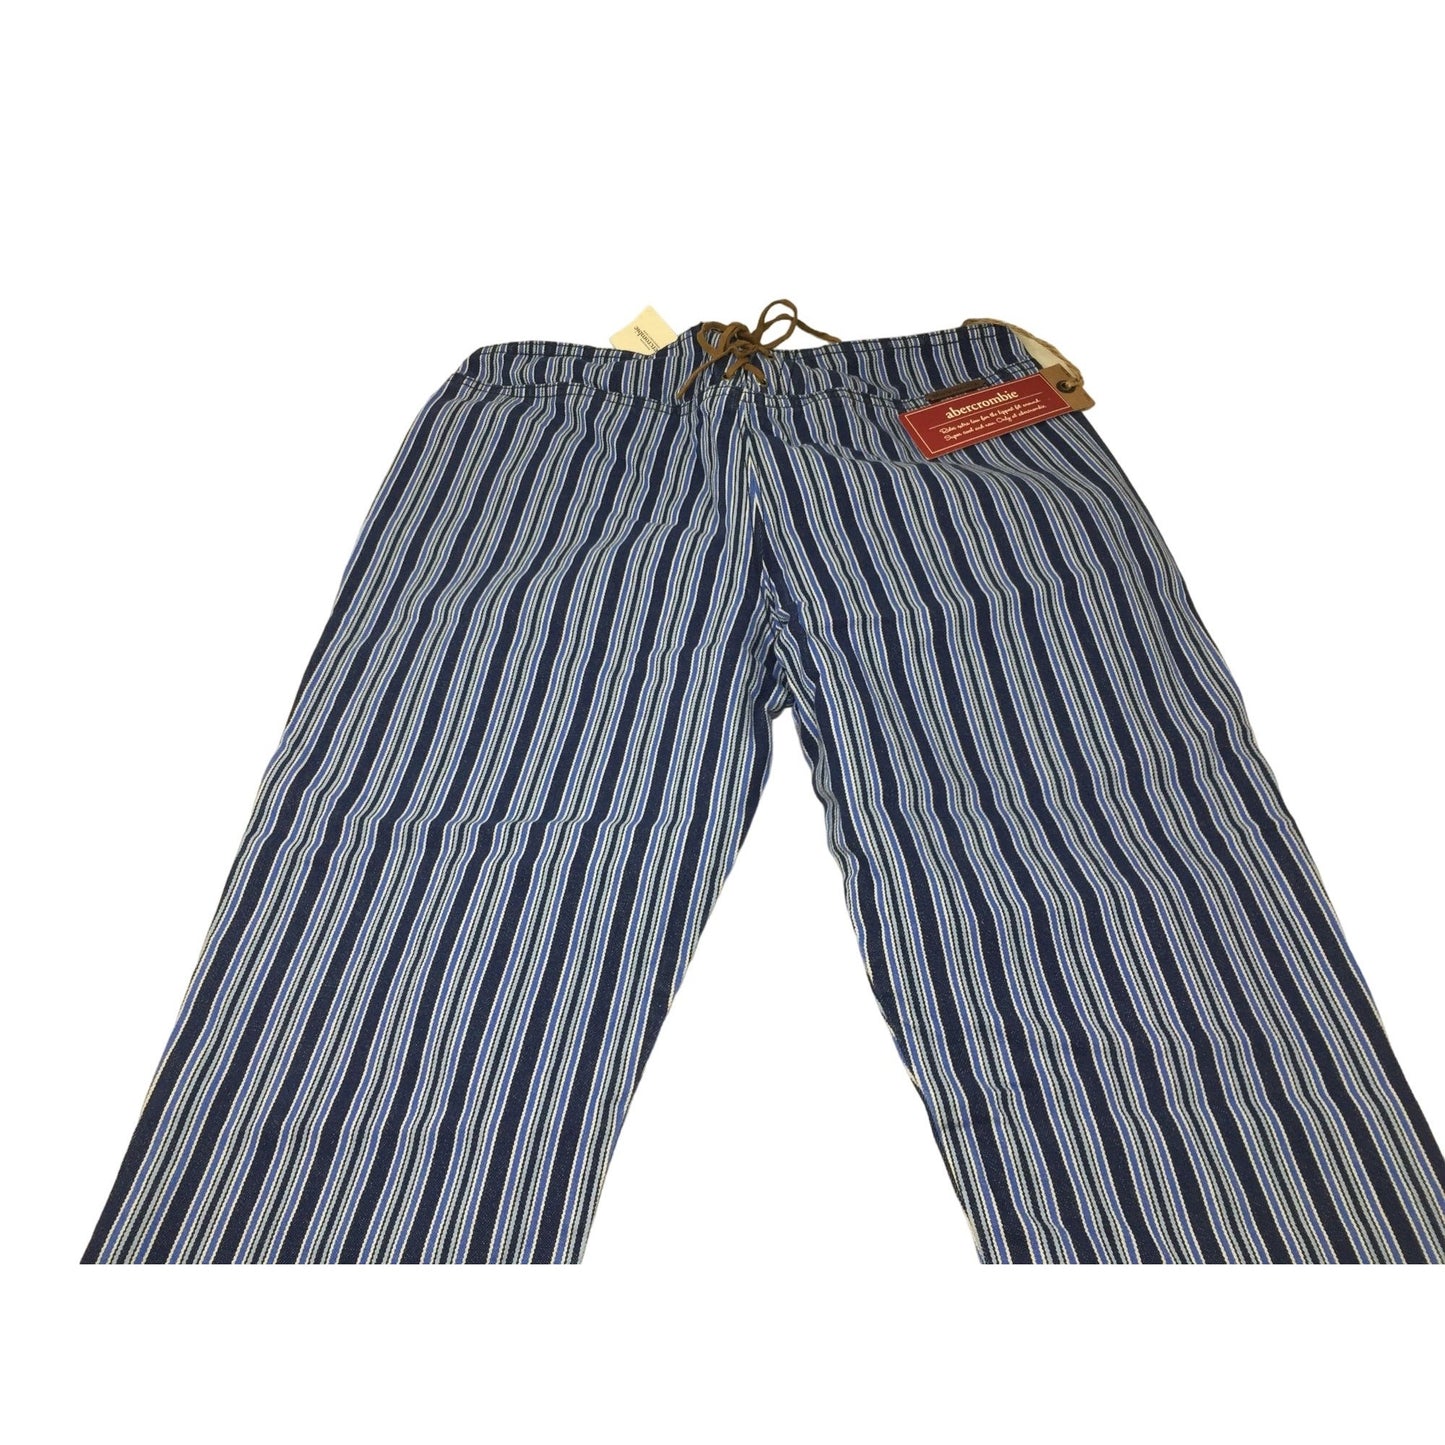 Abercrombie Women's Size 16 Striped Blue Super Low Rise Capri Pants New with Tags